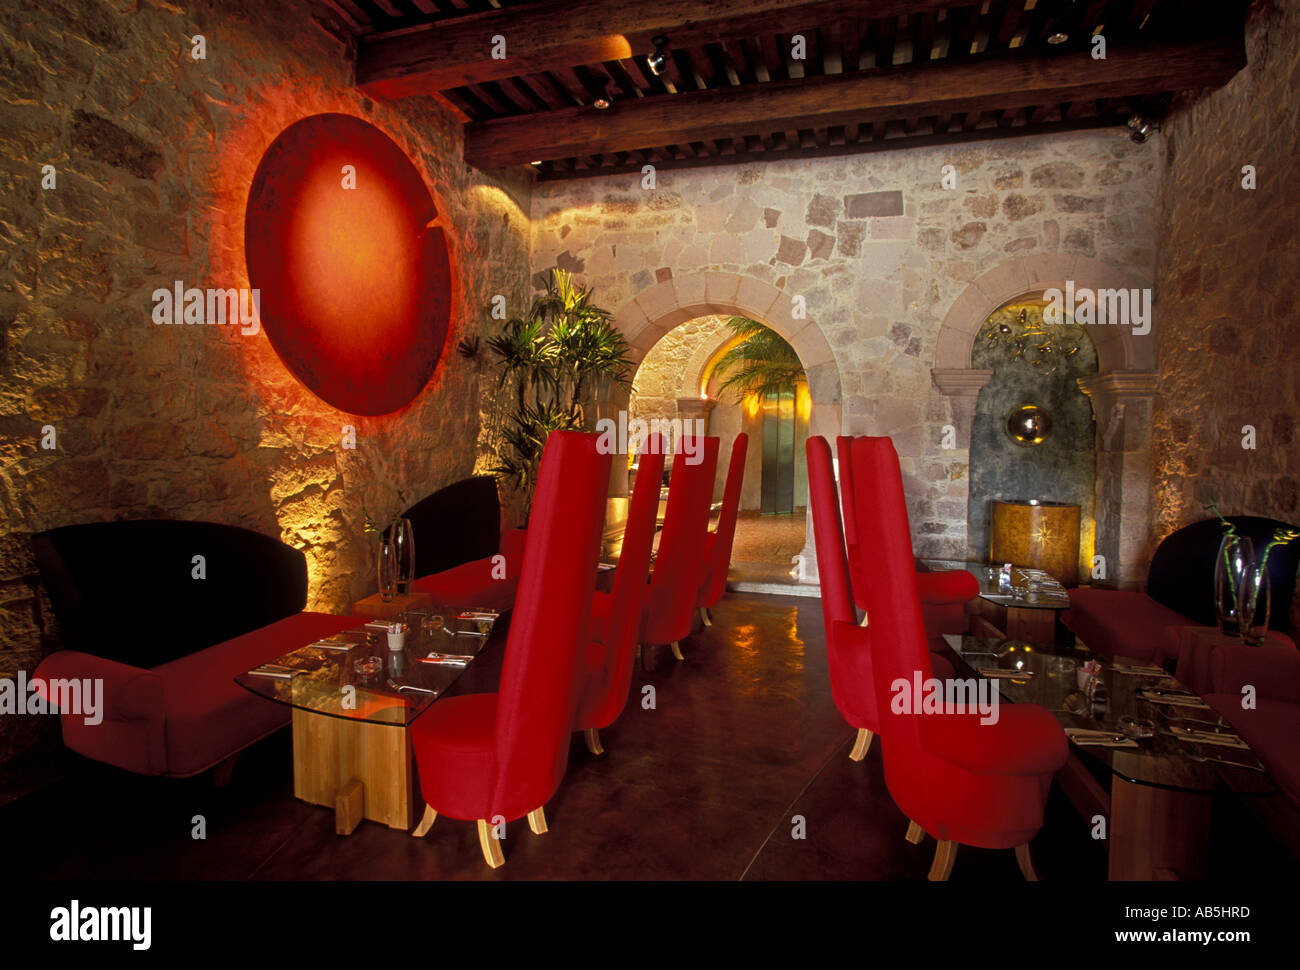 dining room, Onix Restaurant and Bar, Onix Restaurant, Mexican food and drink, Mexican food, food and drink, Morelia, Michoacan State, Mexico Stock Photo